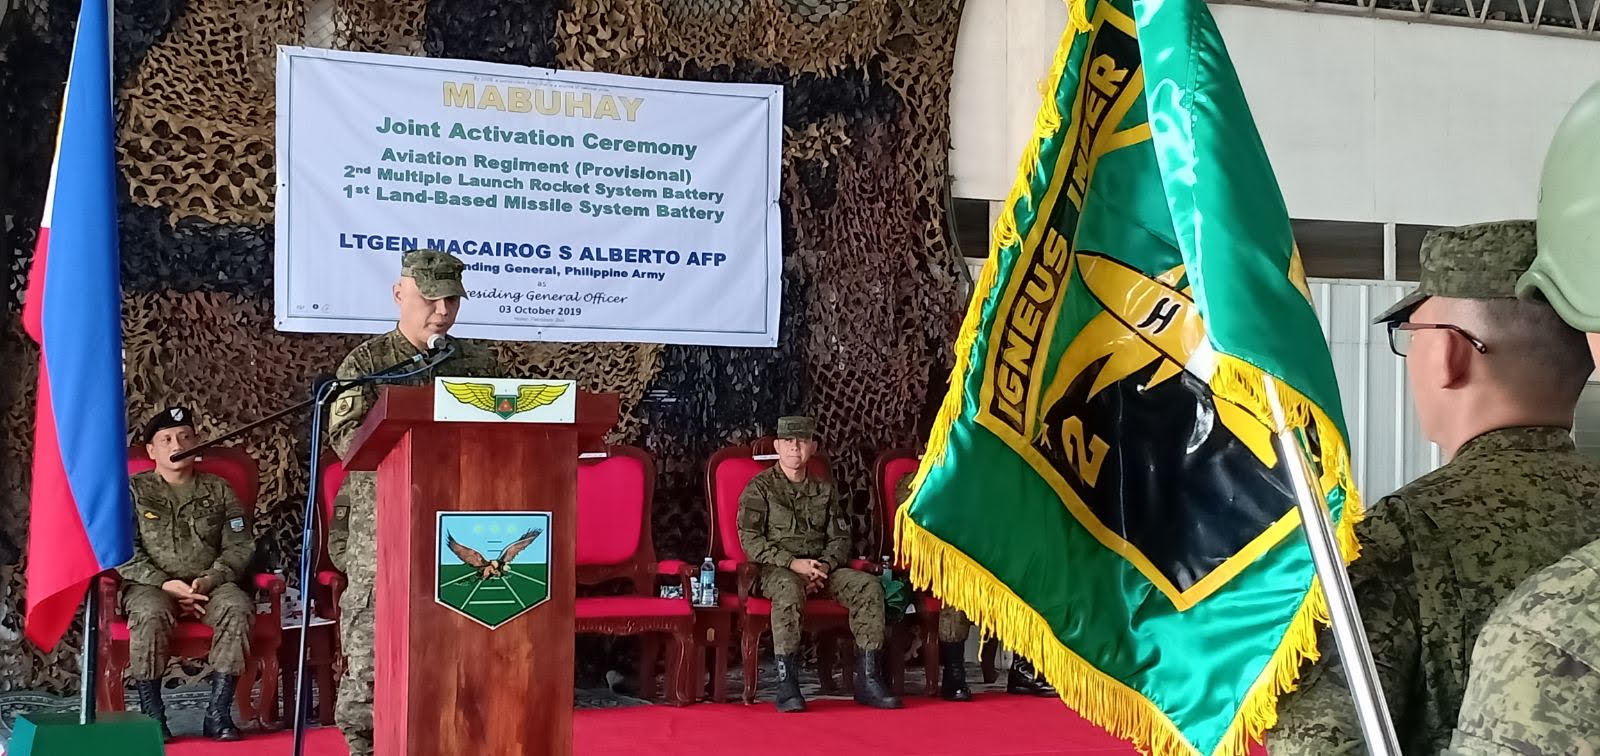 Philippine Army activates the 2nd Multiple Launch Rocket System Battery, along with Army Aviation Regiment and 1st Land-Based Missile System Battery on Thursday, Oct. 3. OACPA